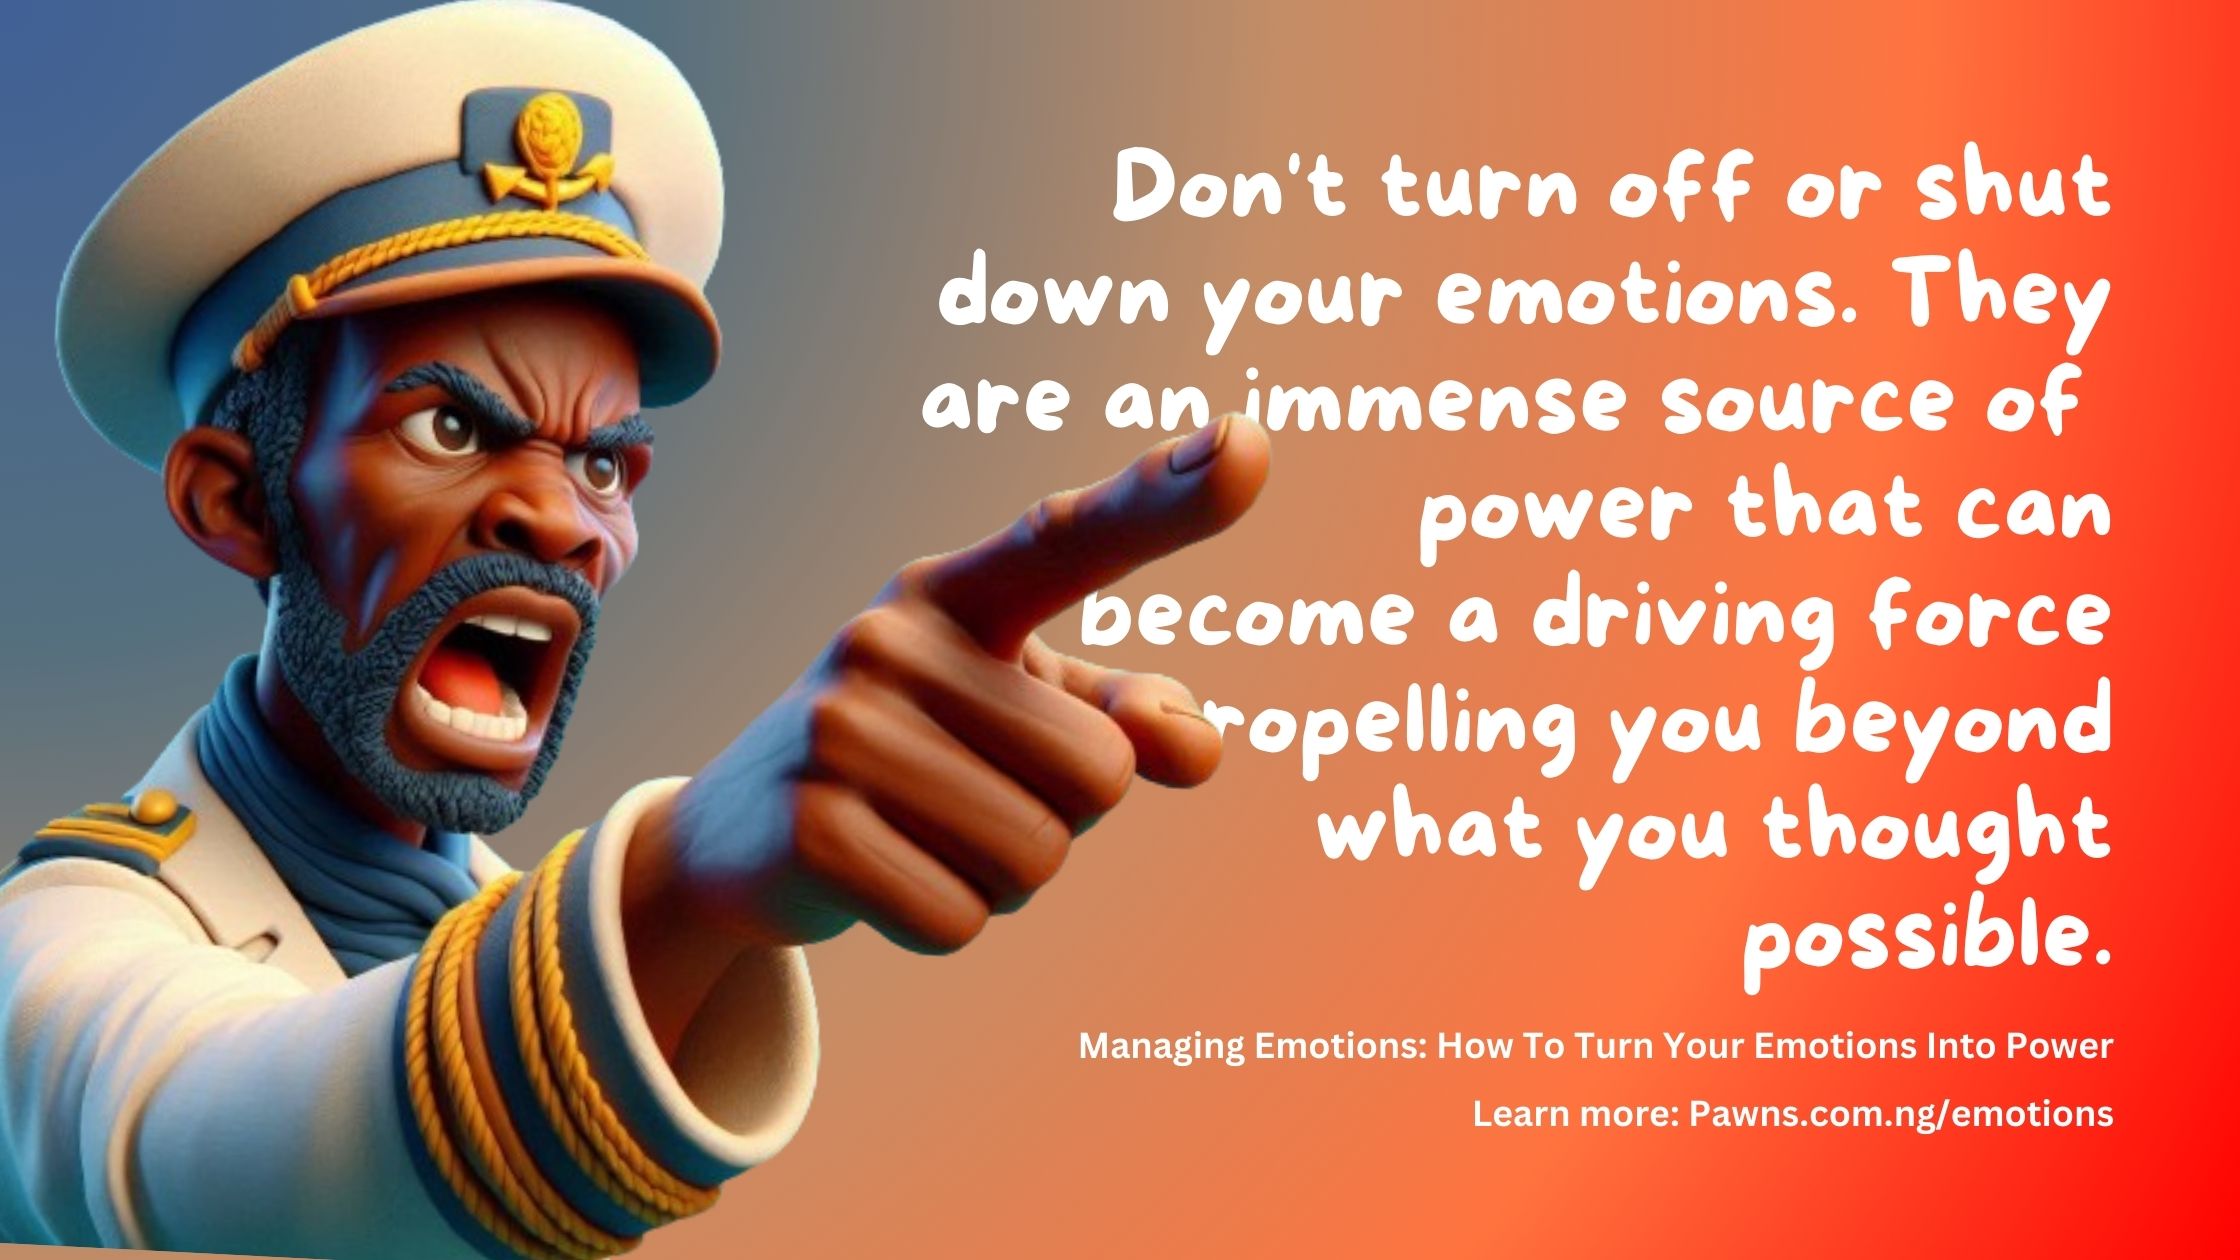 Don't turn off or shut down your emotions. They are an immense source of power that can become a driving force propelling you forward. Managing Emotions How To Turn Your Emotions Into Power